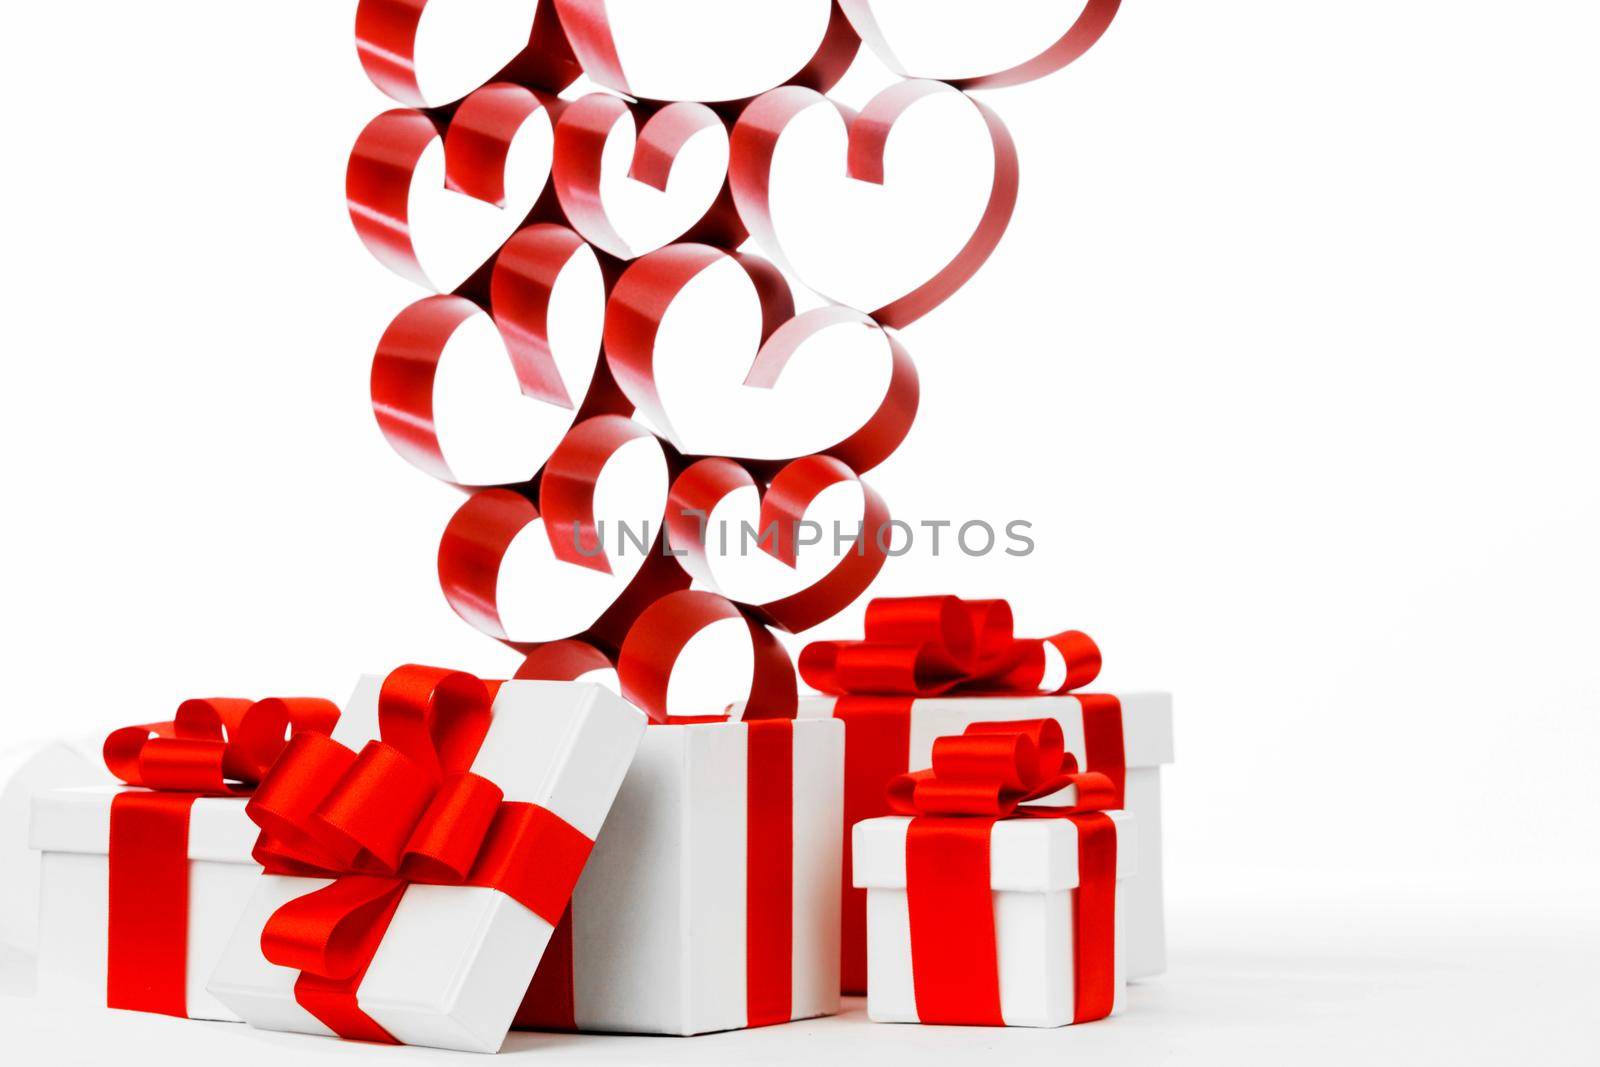 Valentine day gifts in white boxes with red ribbons and hearts isolated on white background